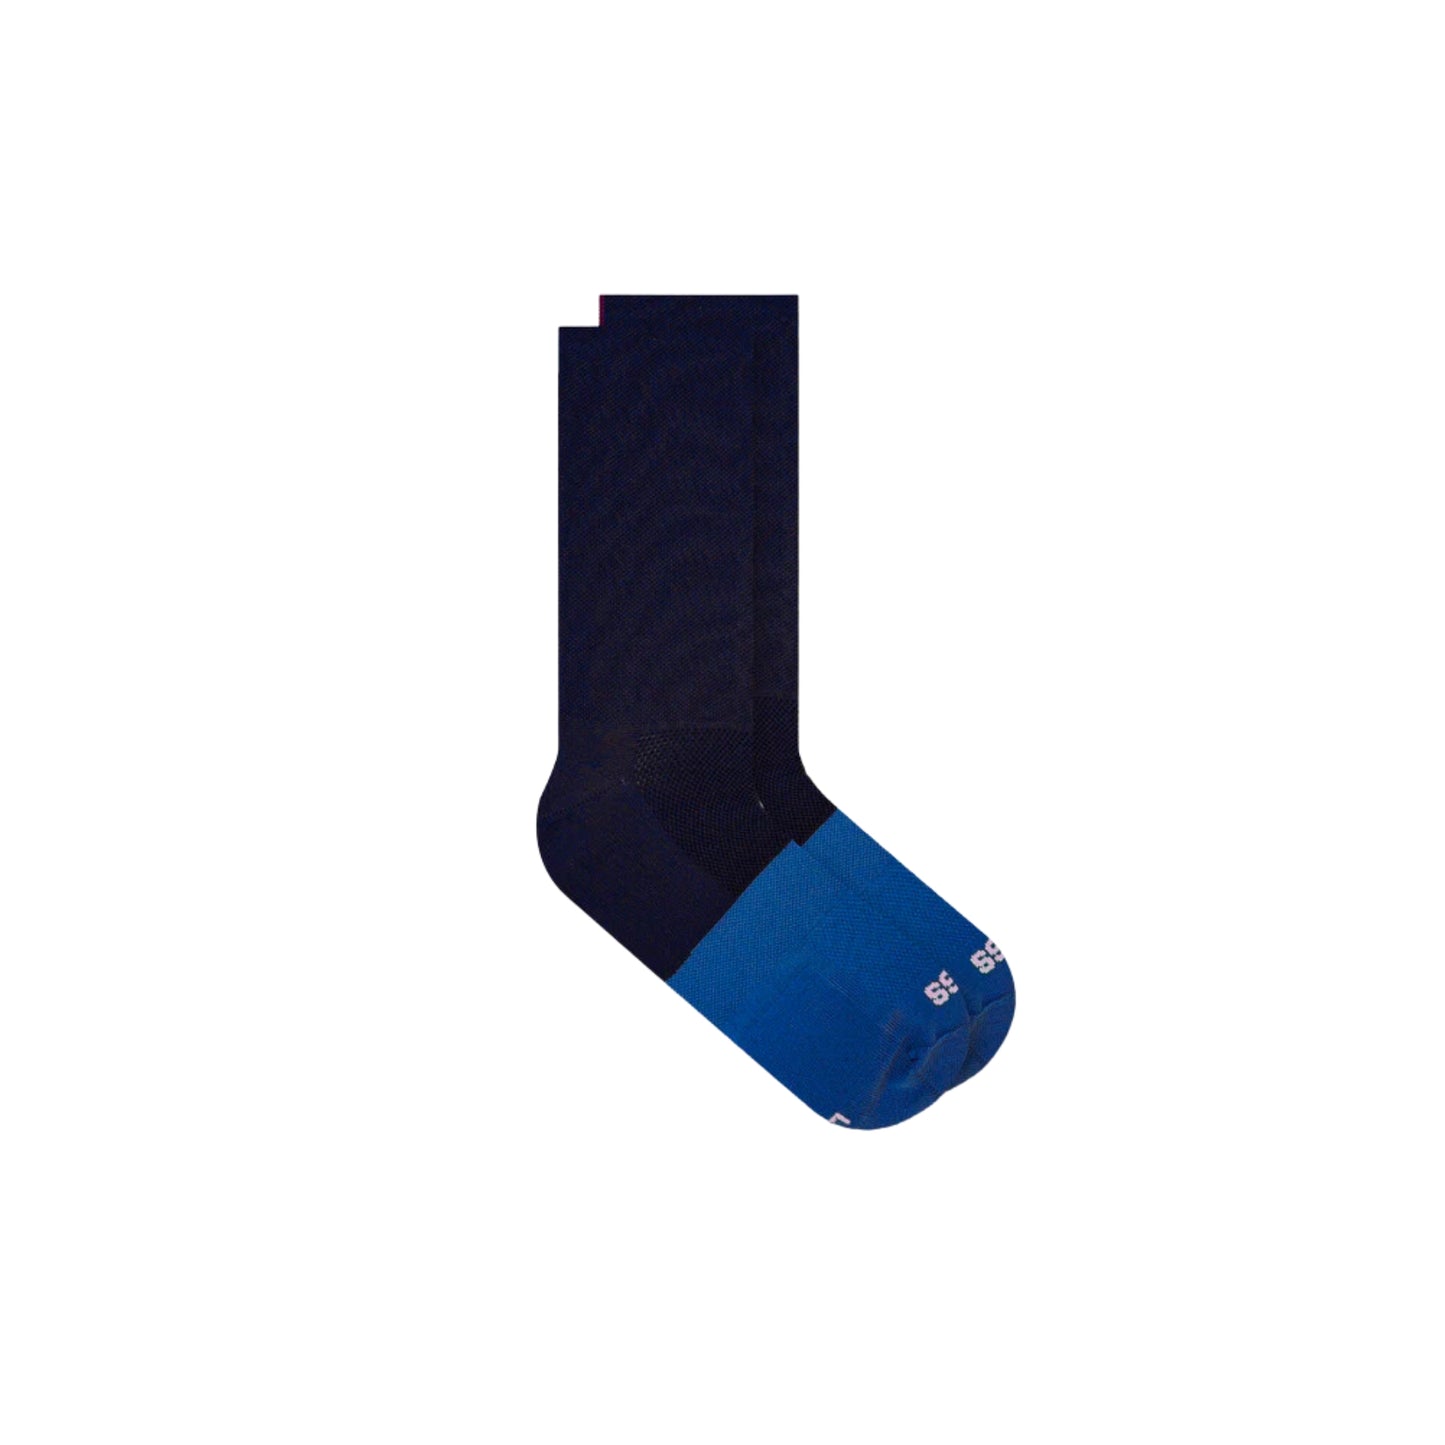 Calcetines de ciclismo NDLESS Navy